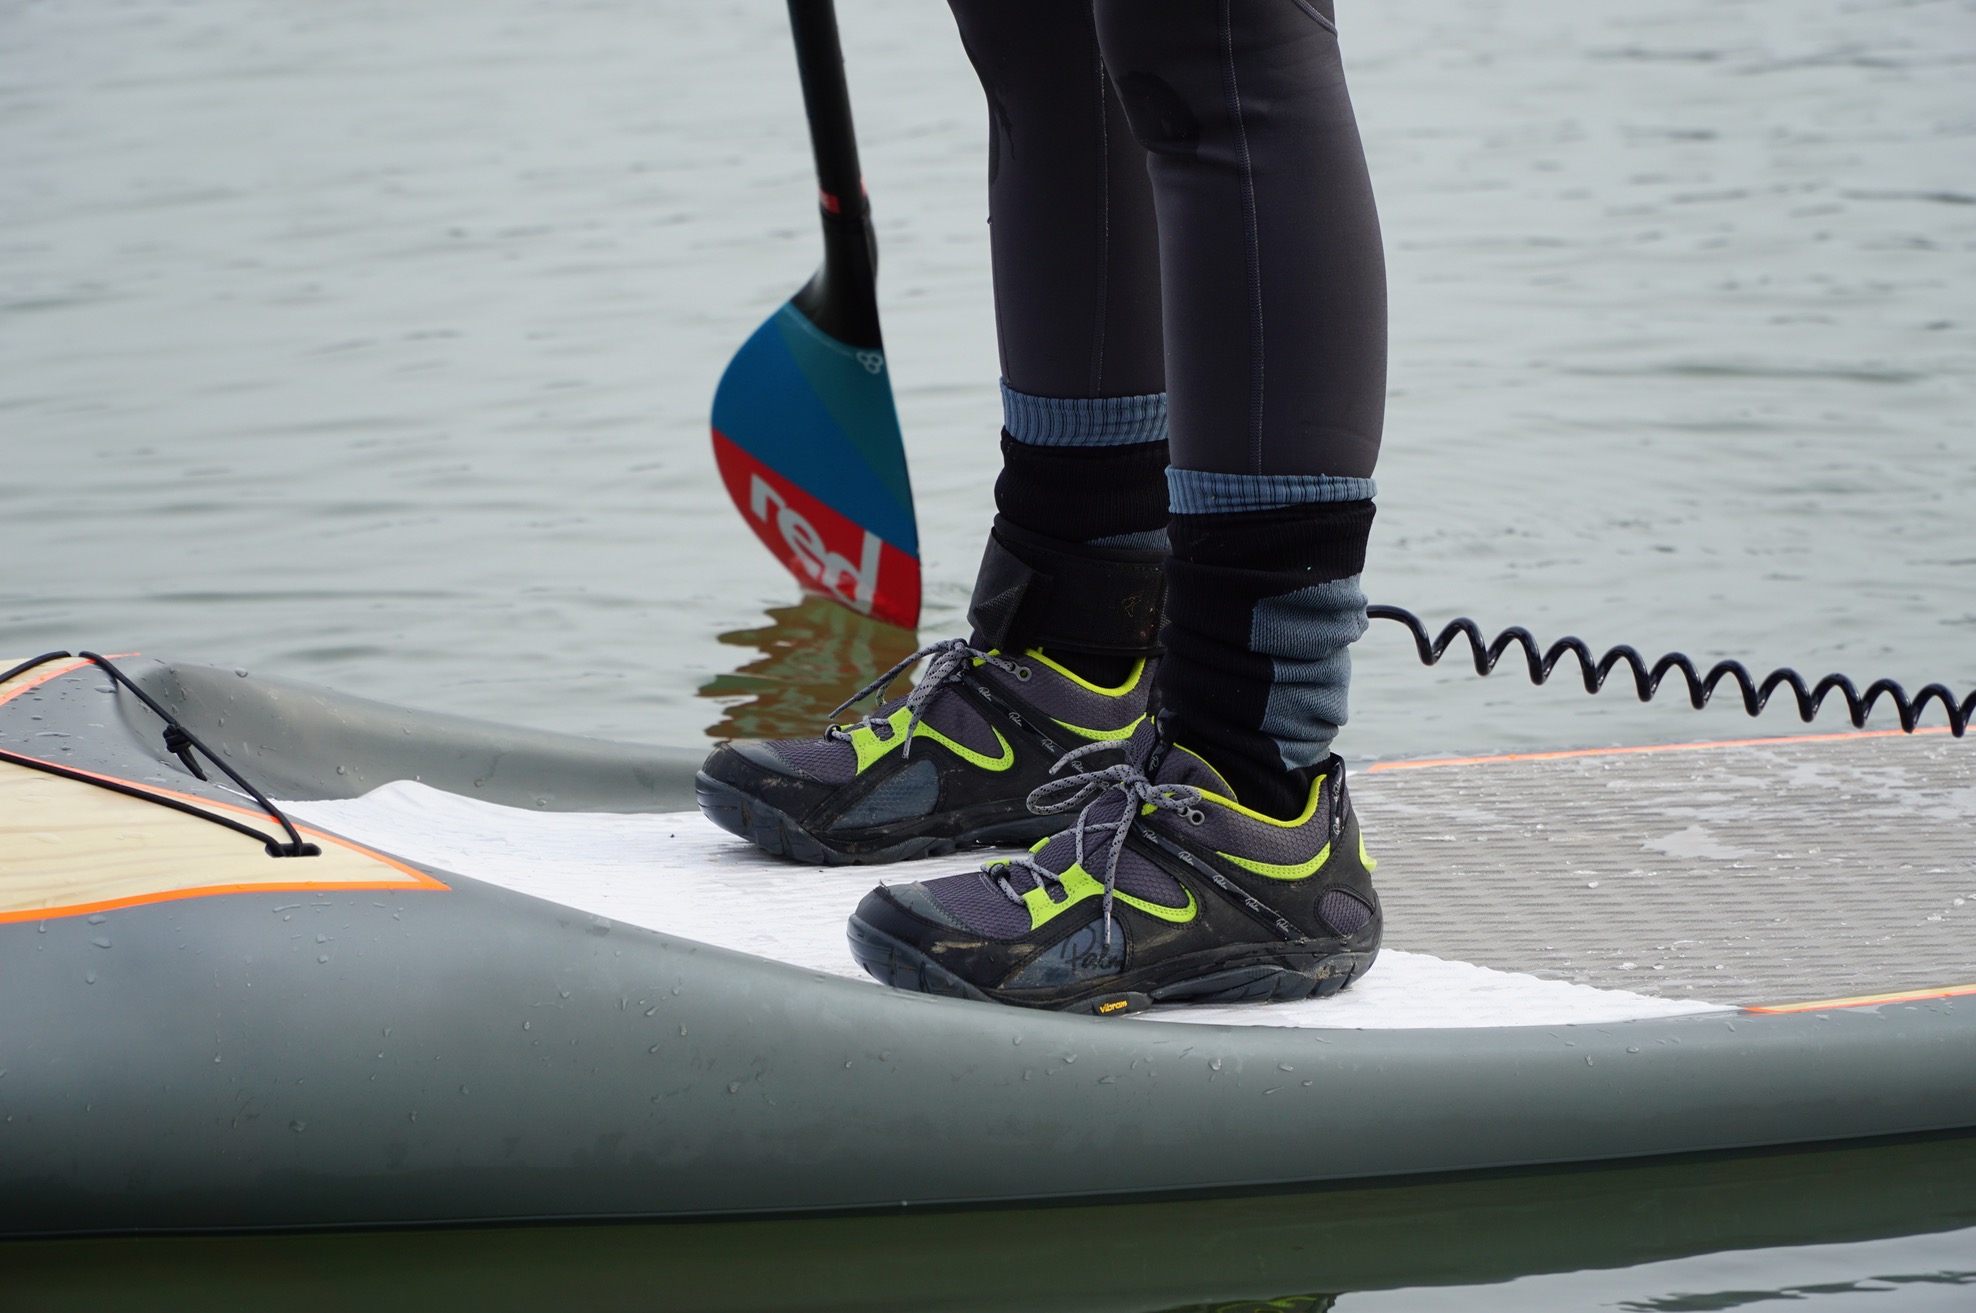 What to wear on your feet paddleboarding? - trainers